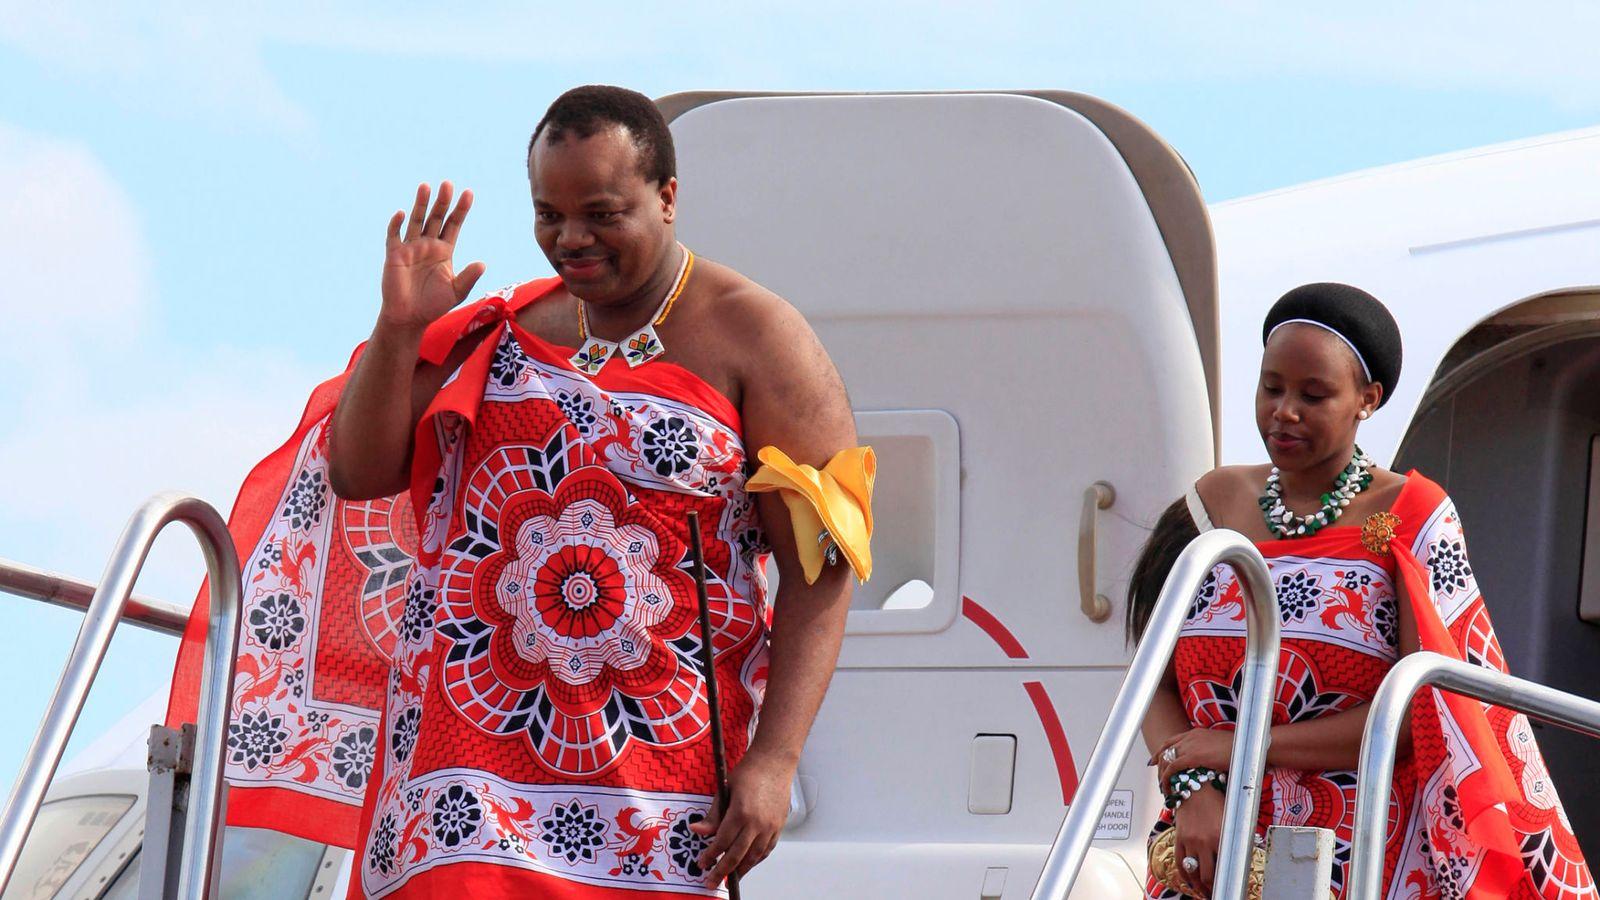 King of Swaziland changes his country's name to eSwatini. World